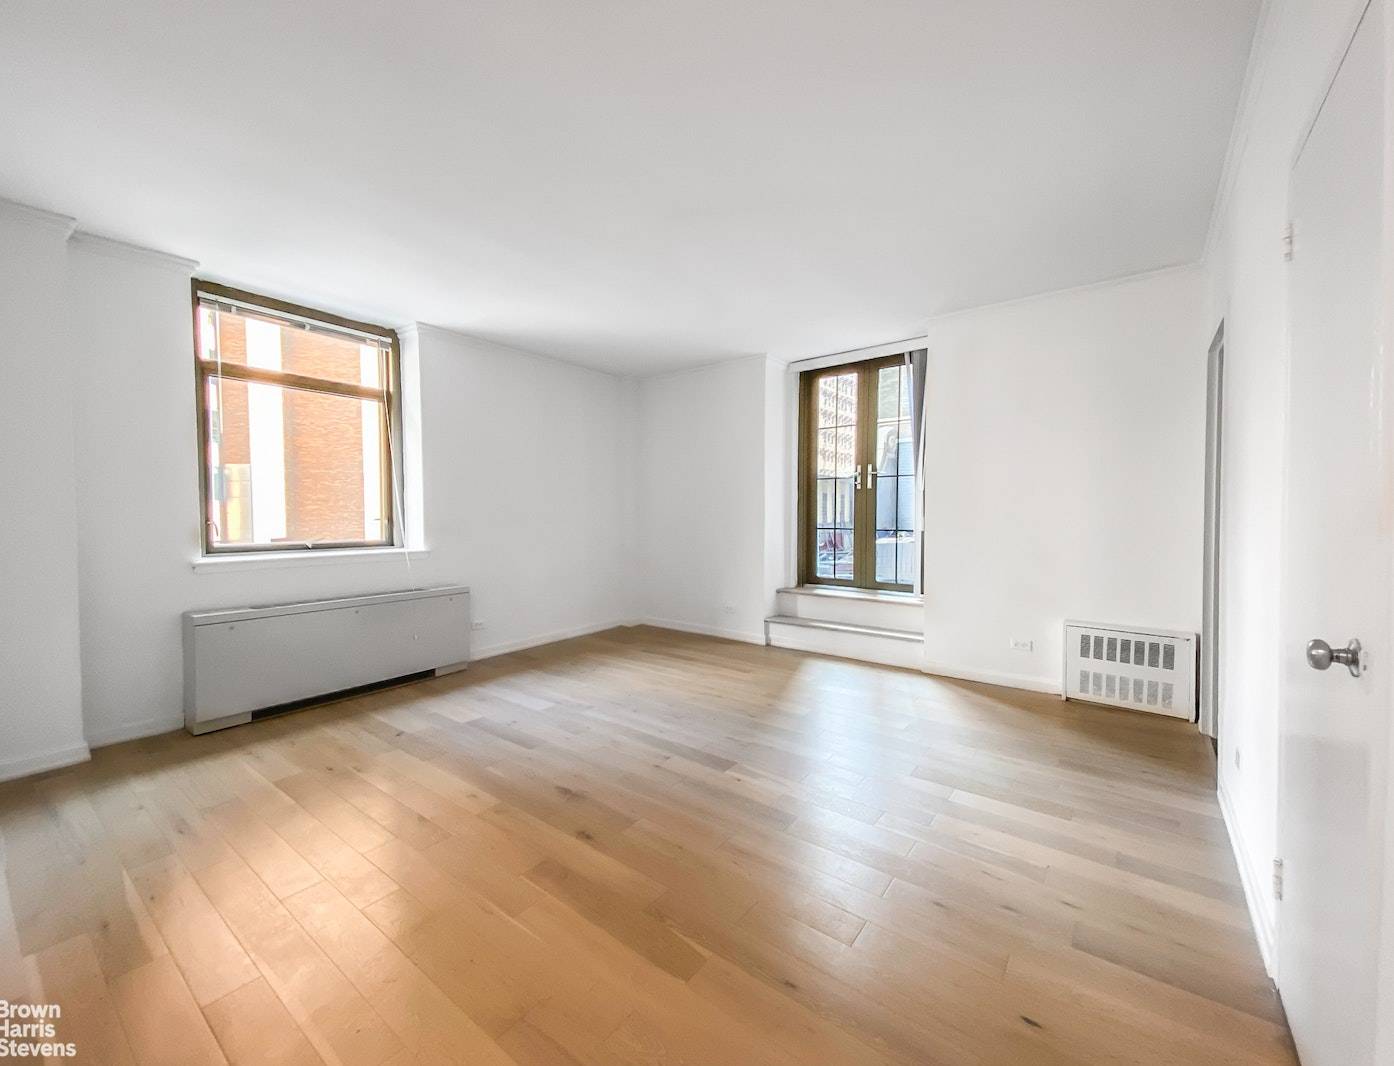 Renovated, corner one bedroom apartment with excellent light.